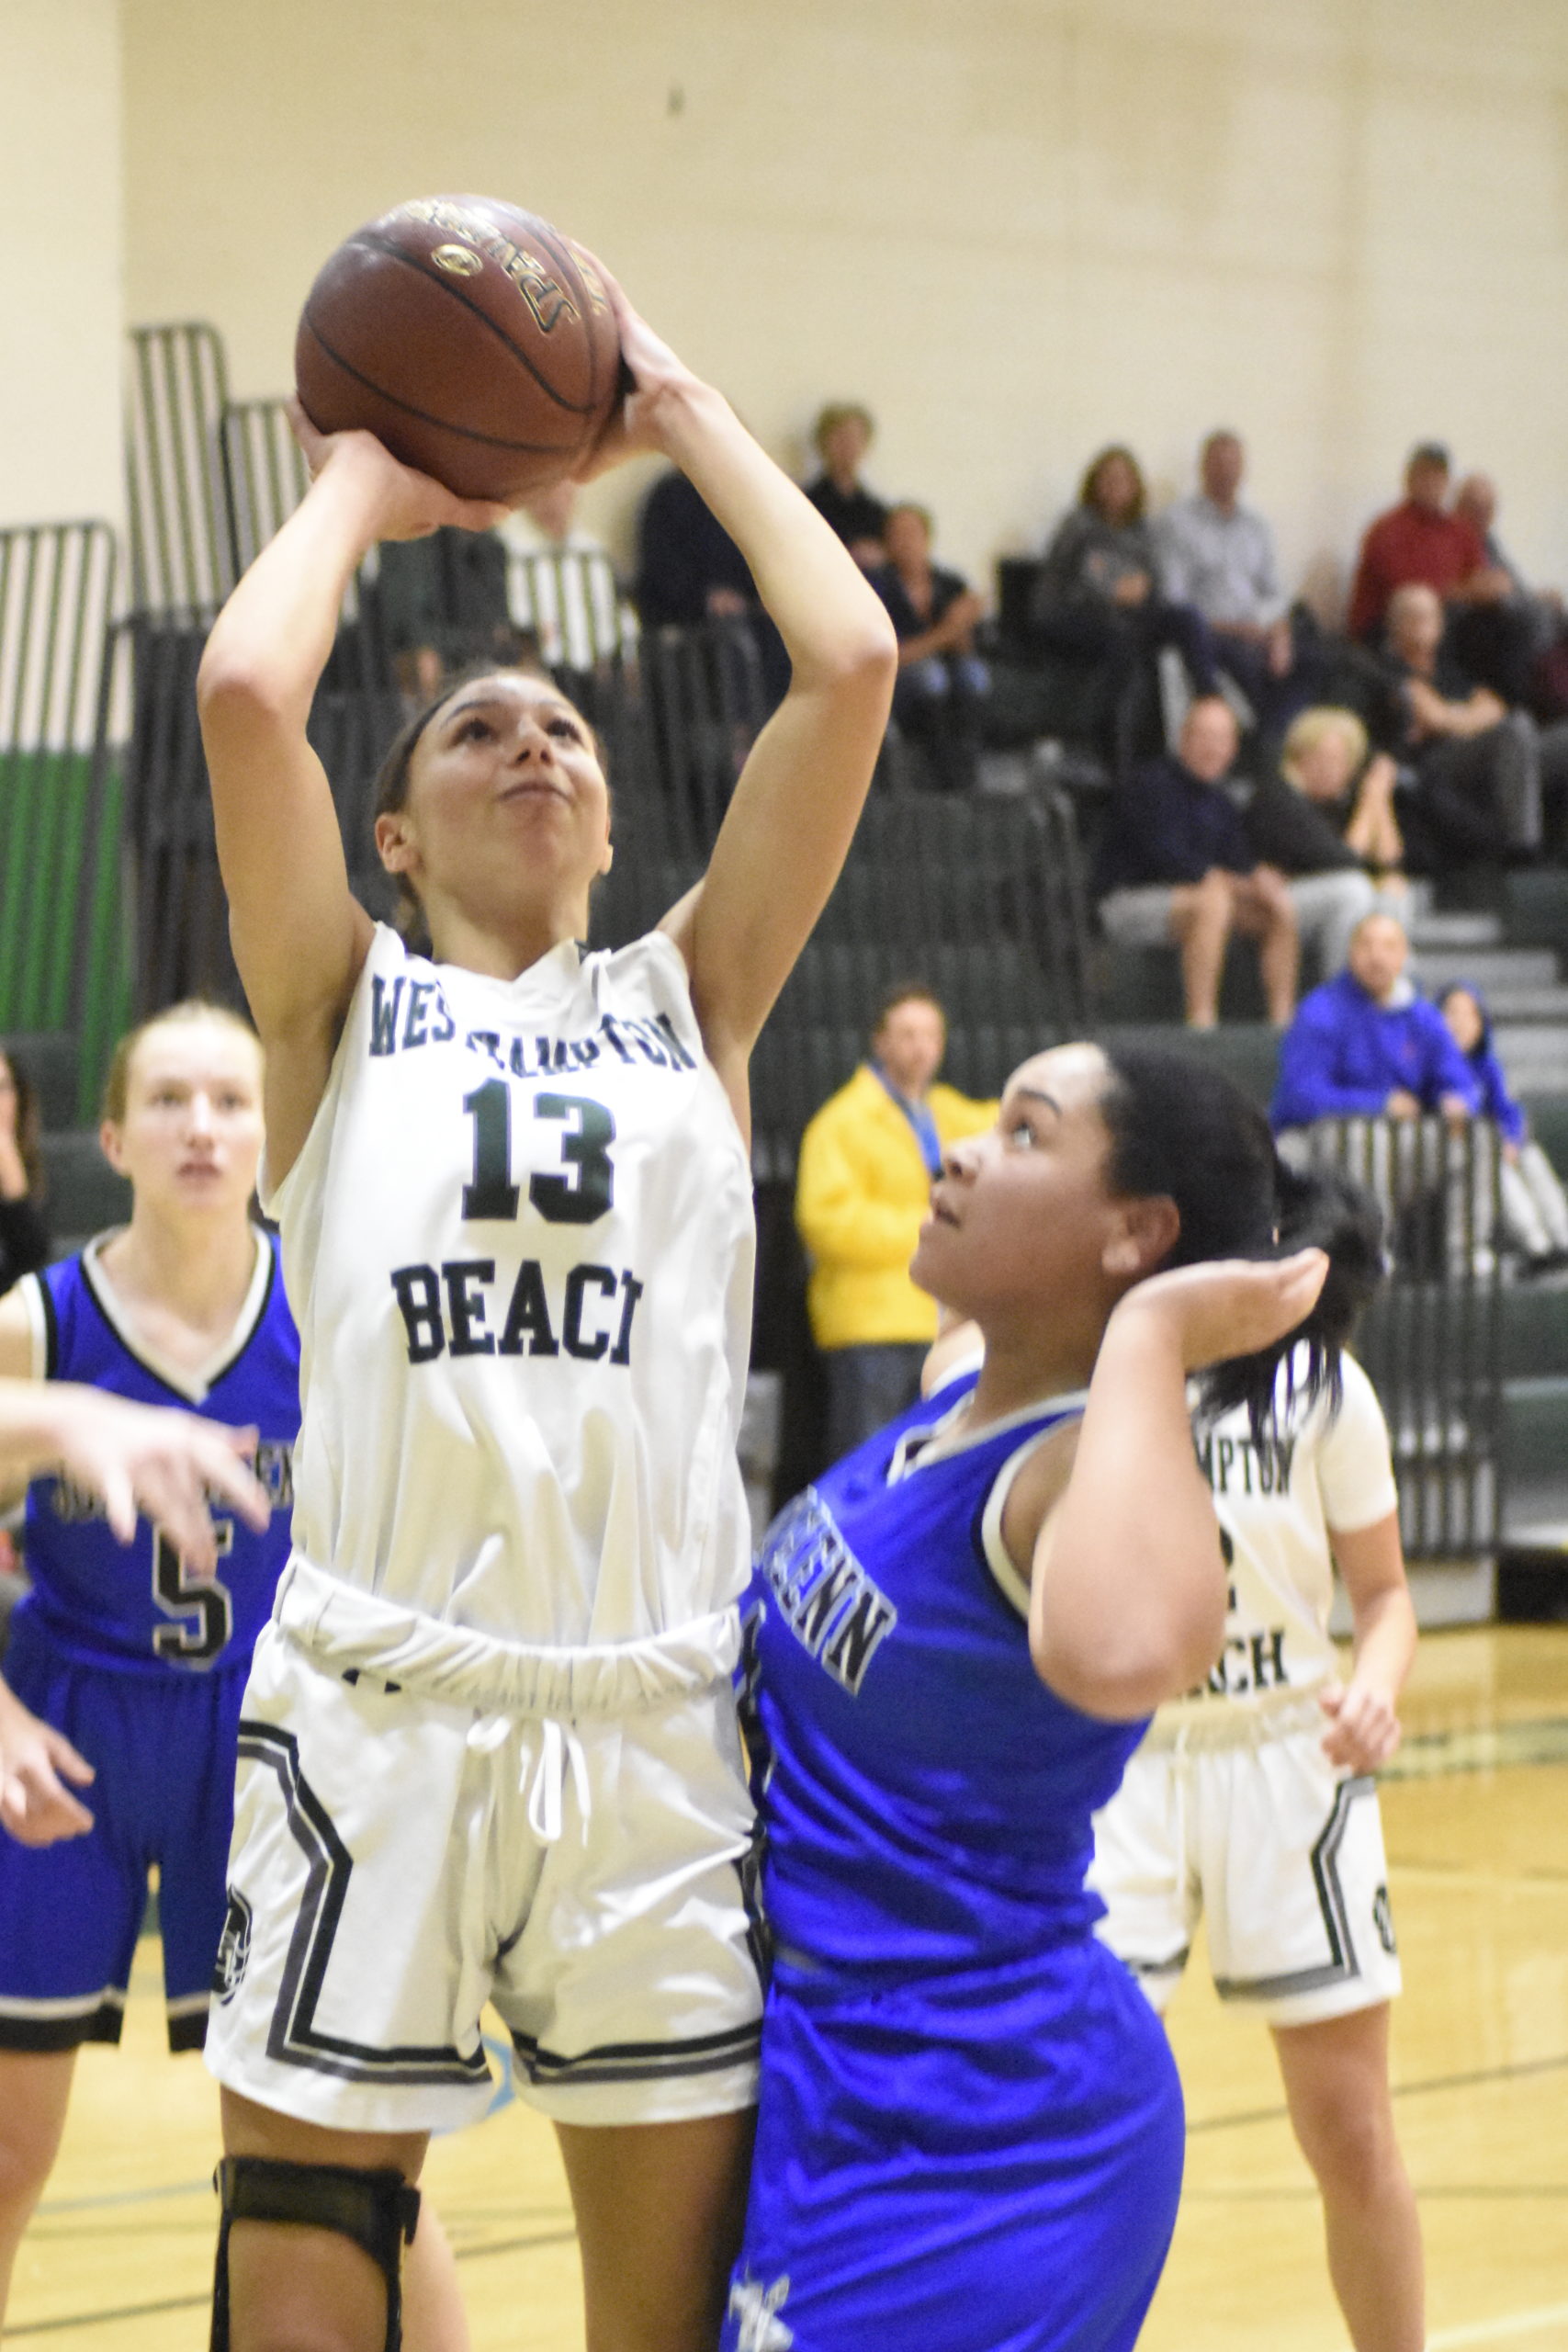 Westhampton Beach senior Layla Mendoza scored a game-high 25 points in a victory over Glenn on Friday.